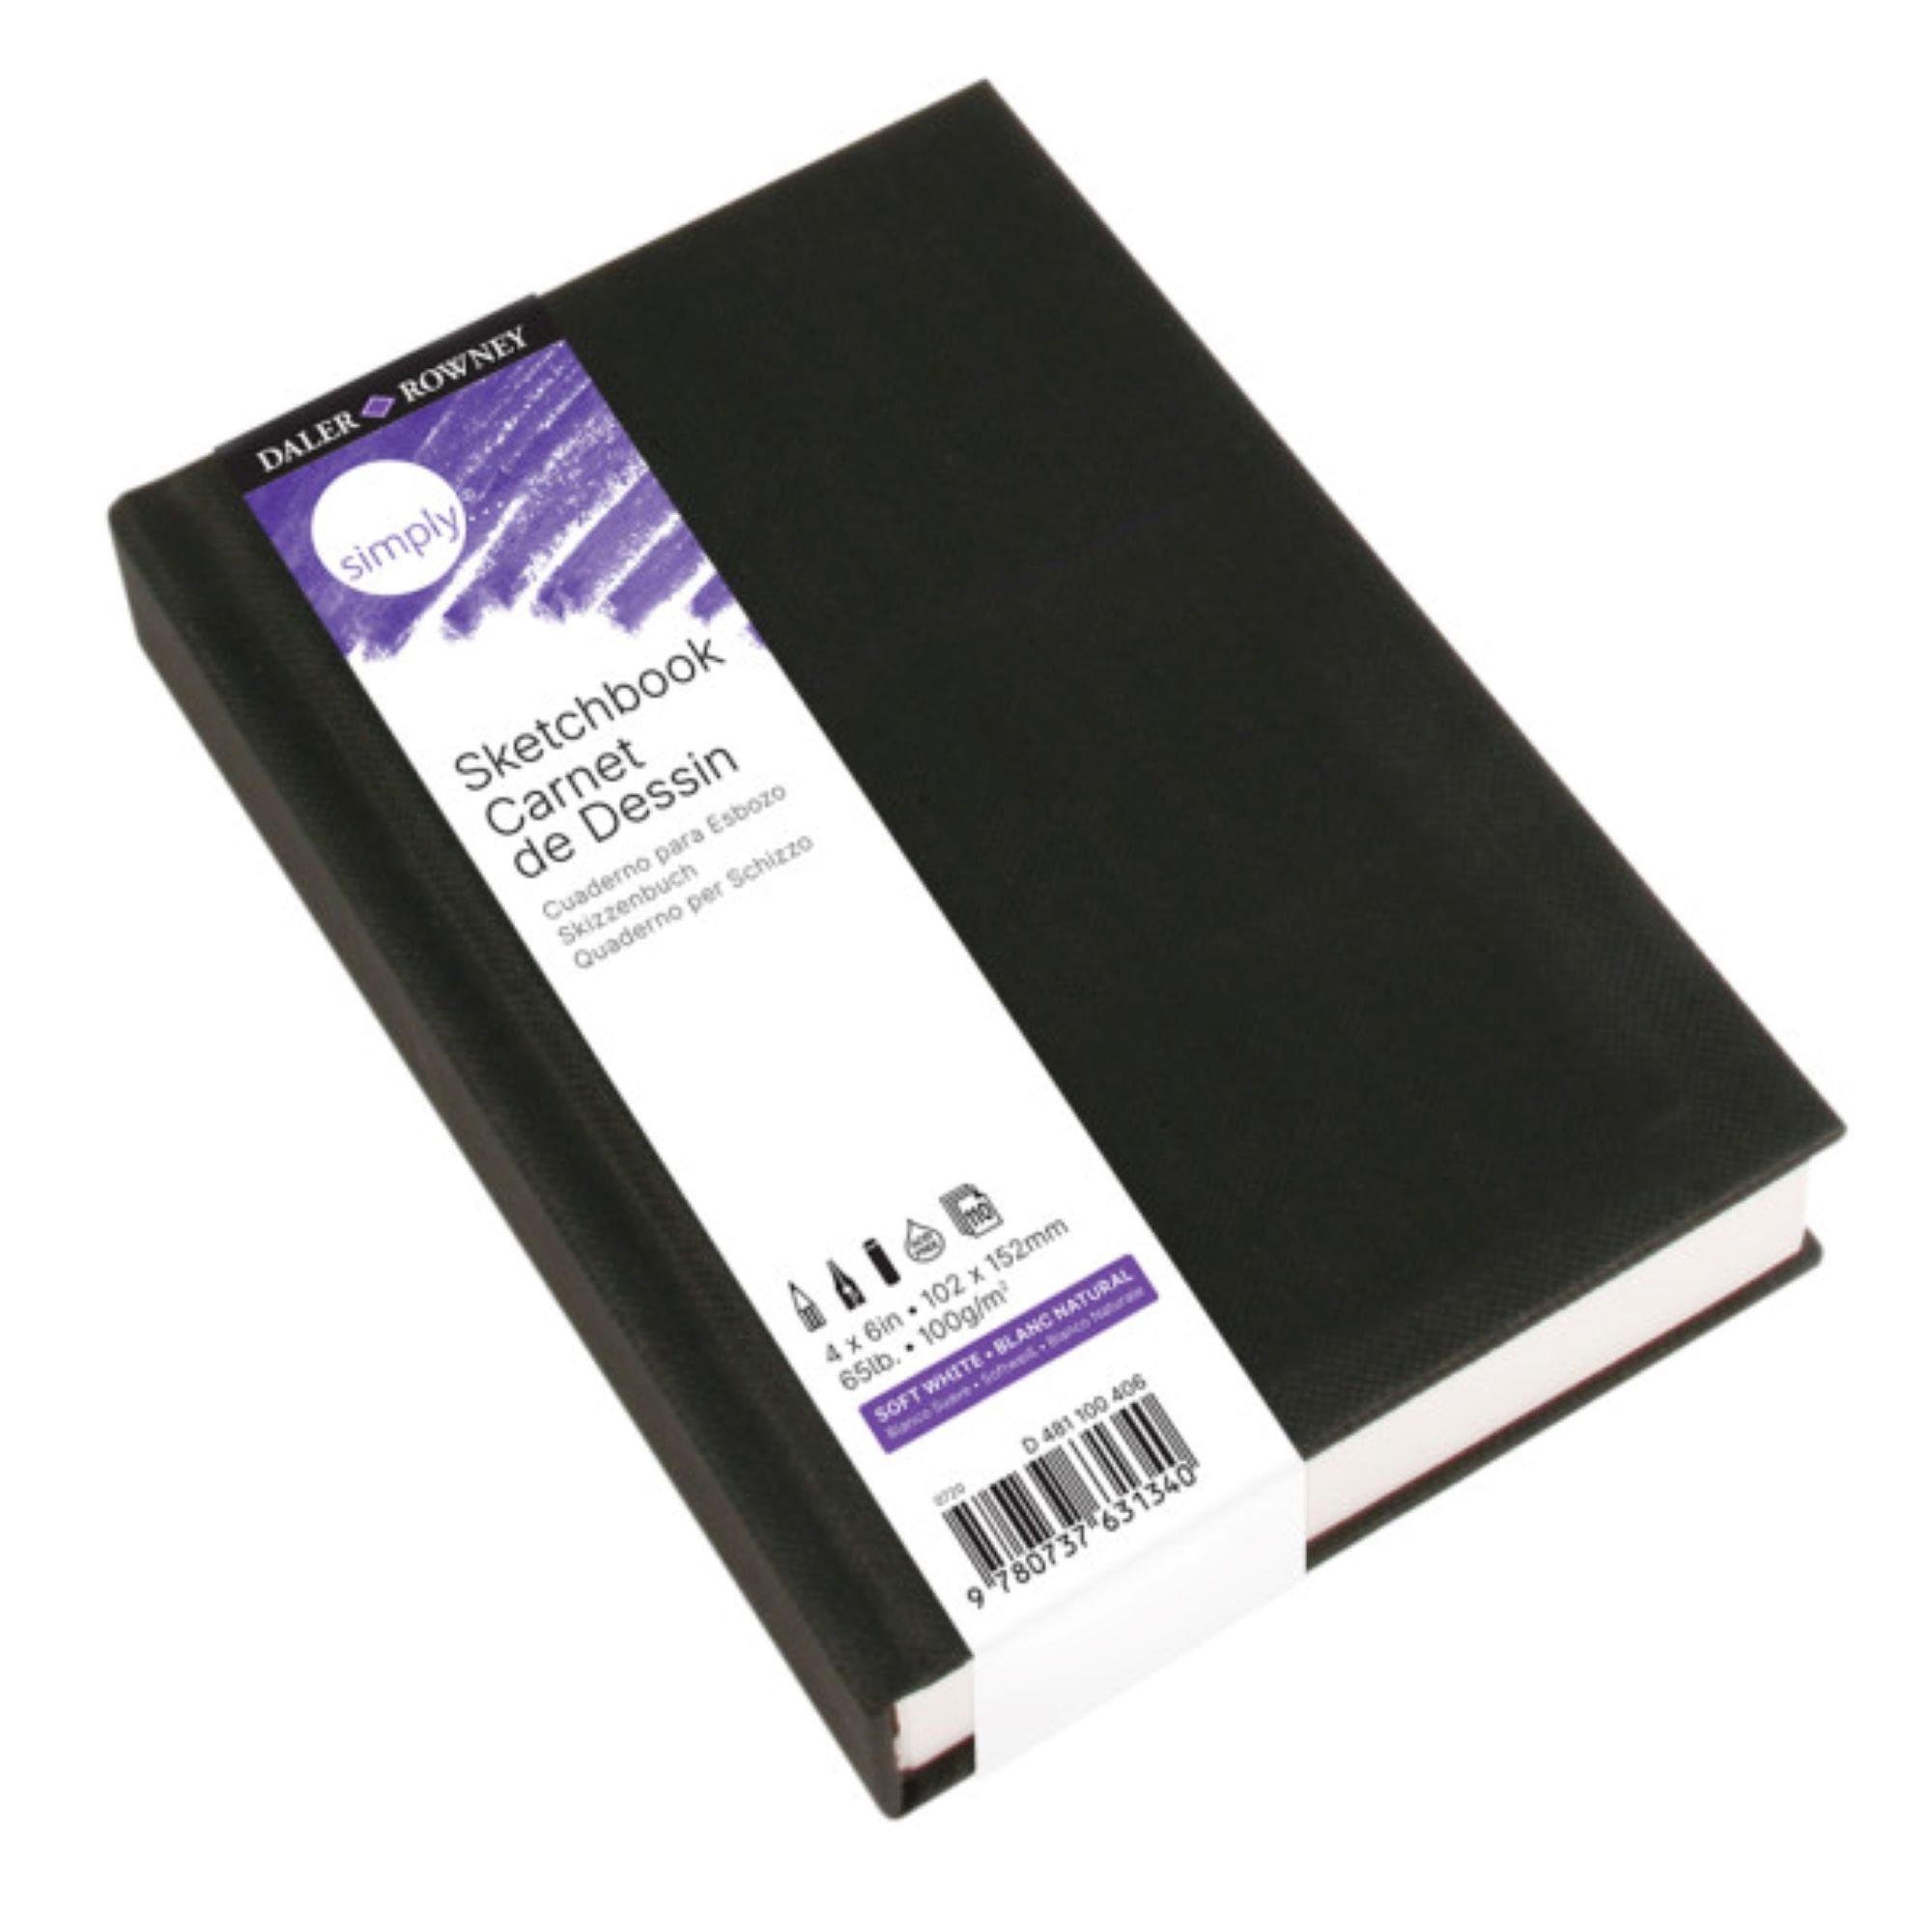 Daler-Rowney Simply Sketchbook, Black Cover, Sketch Paper, 4" x 6", 110 Sheets for Students & Artists - image 1 of 7